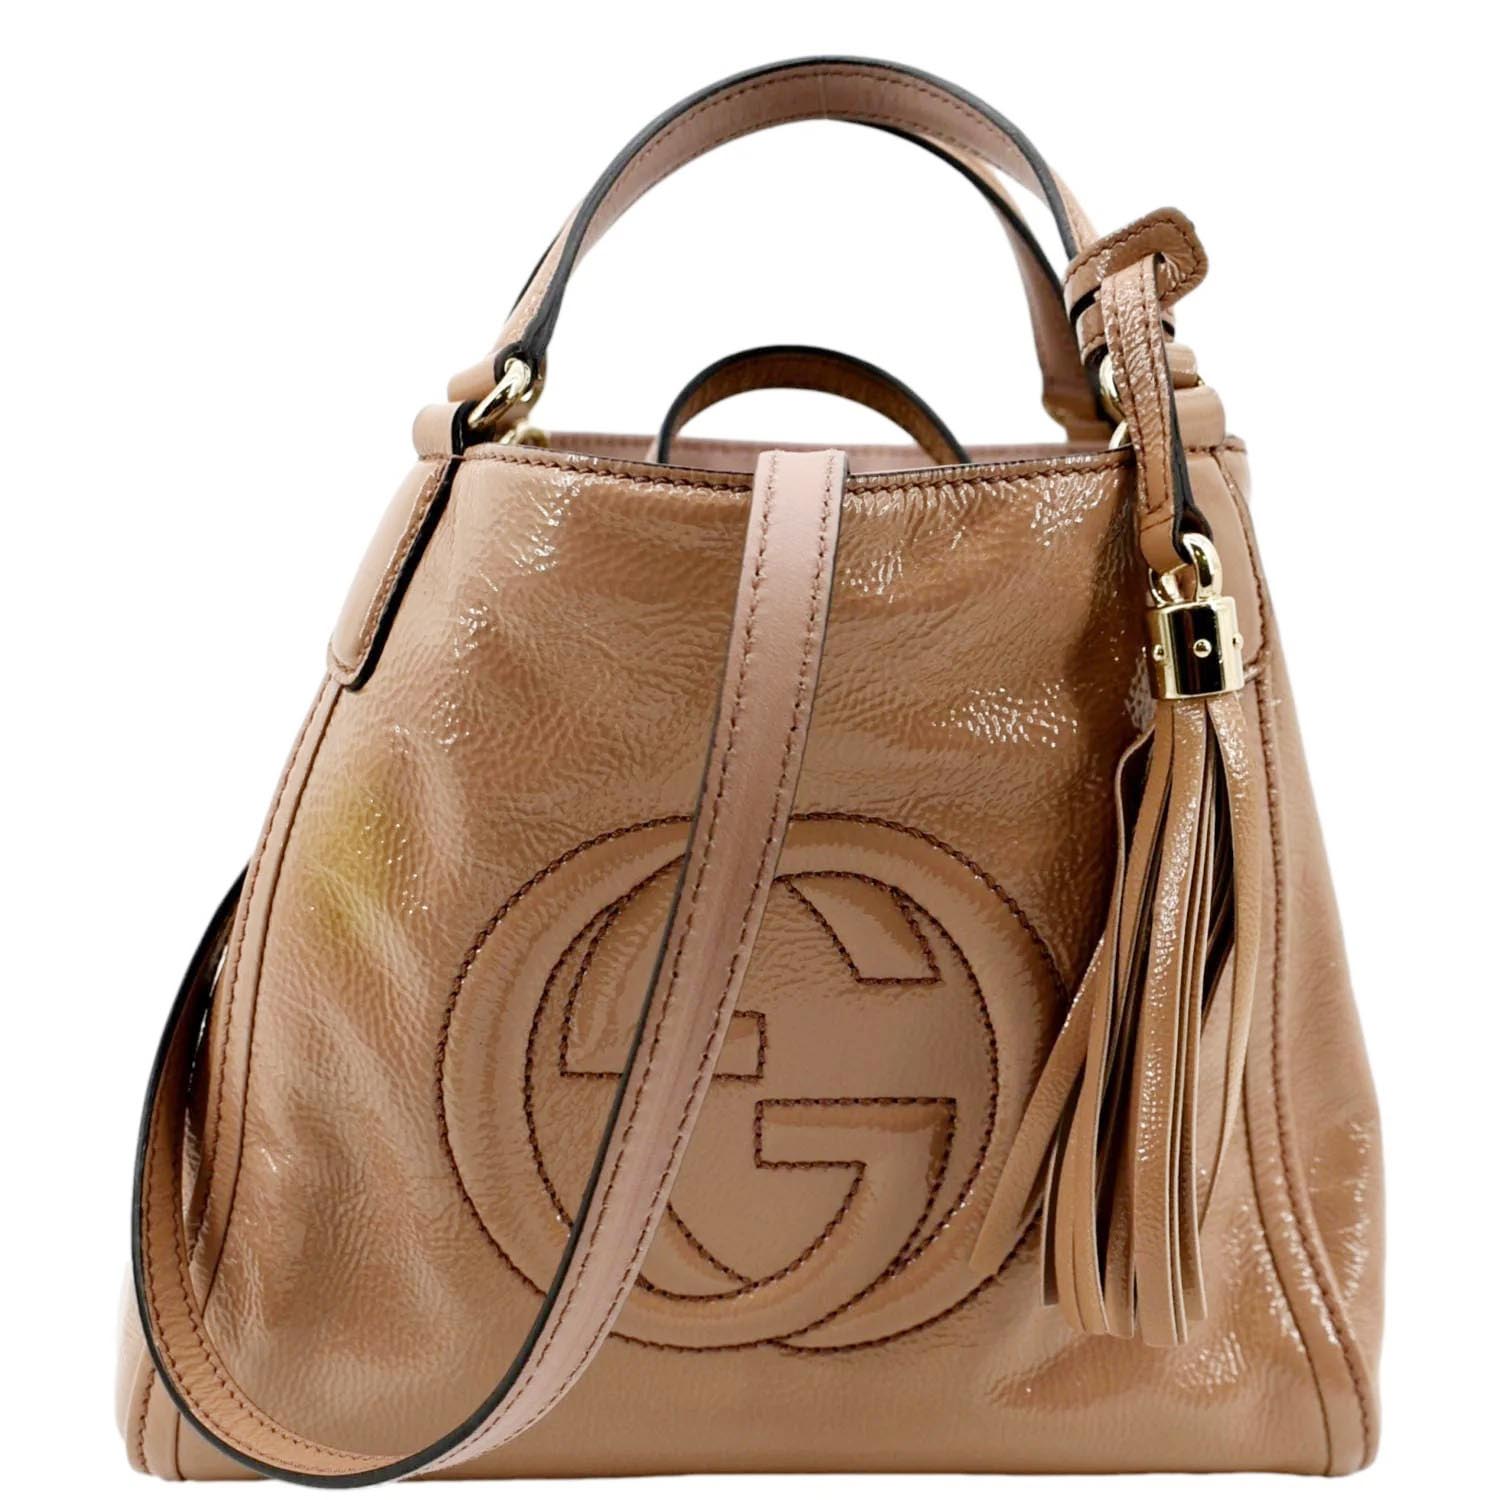 Gucci Soho Small Leather Shoulder Bag Neutral Color